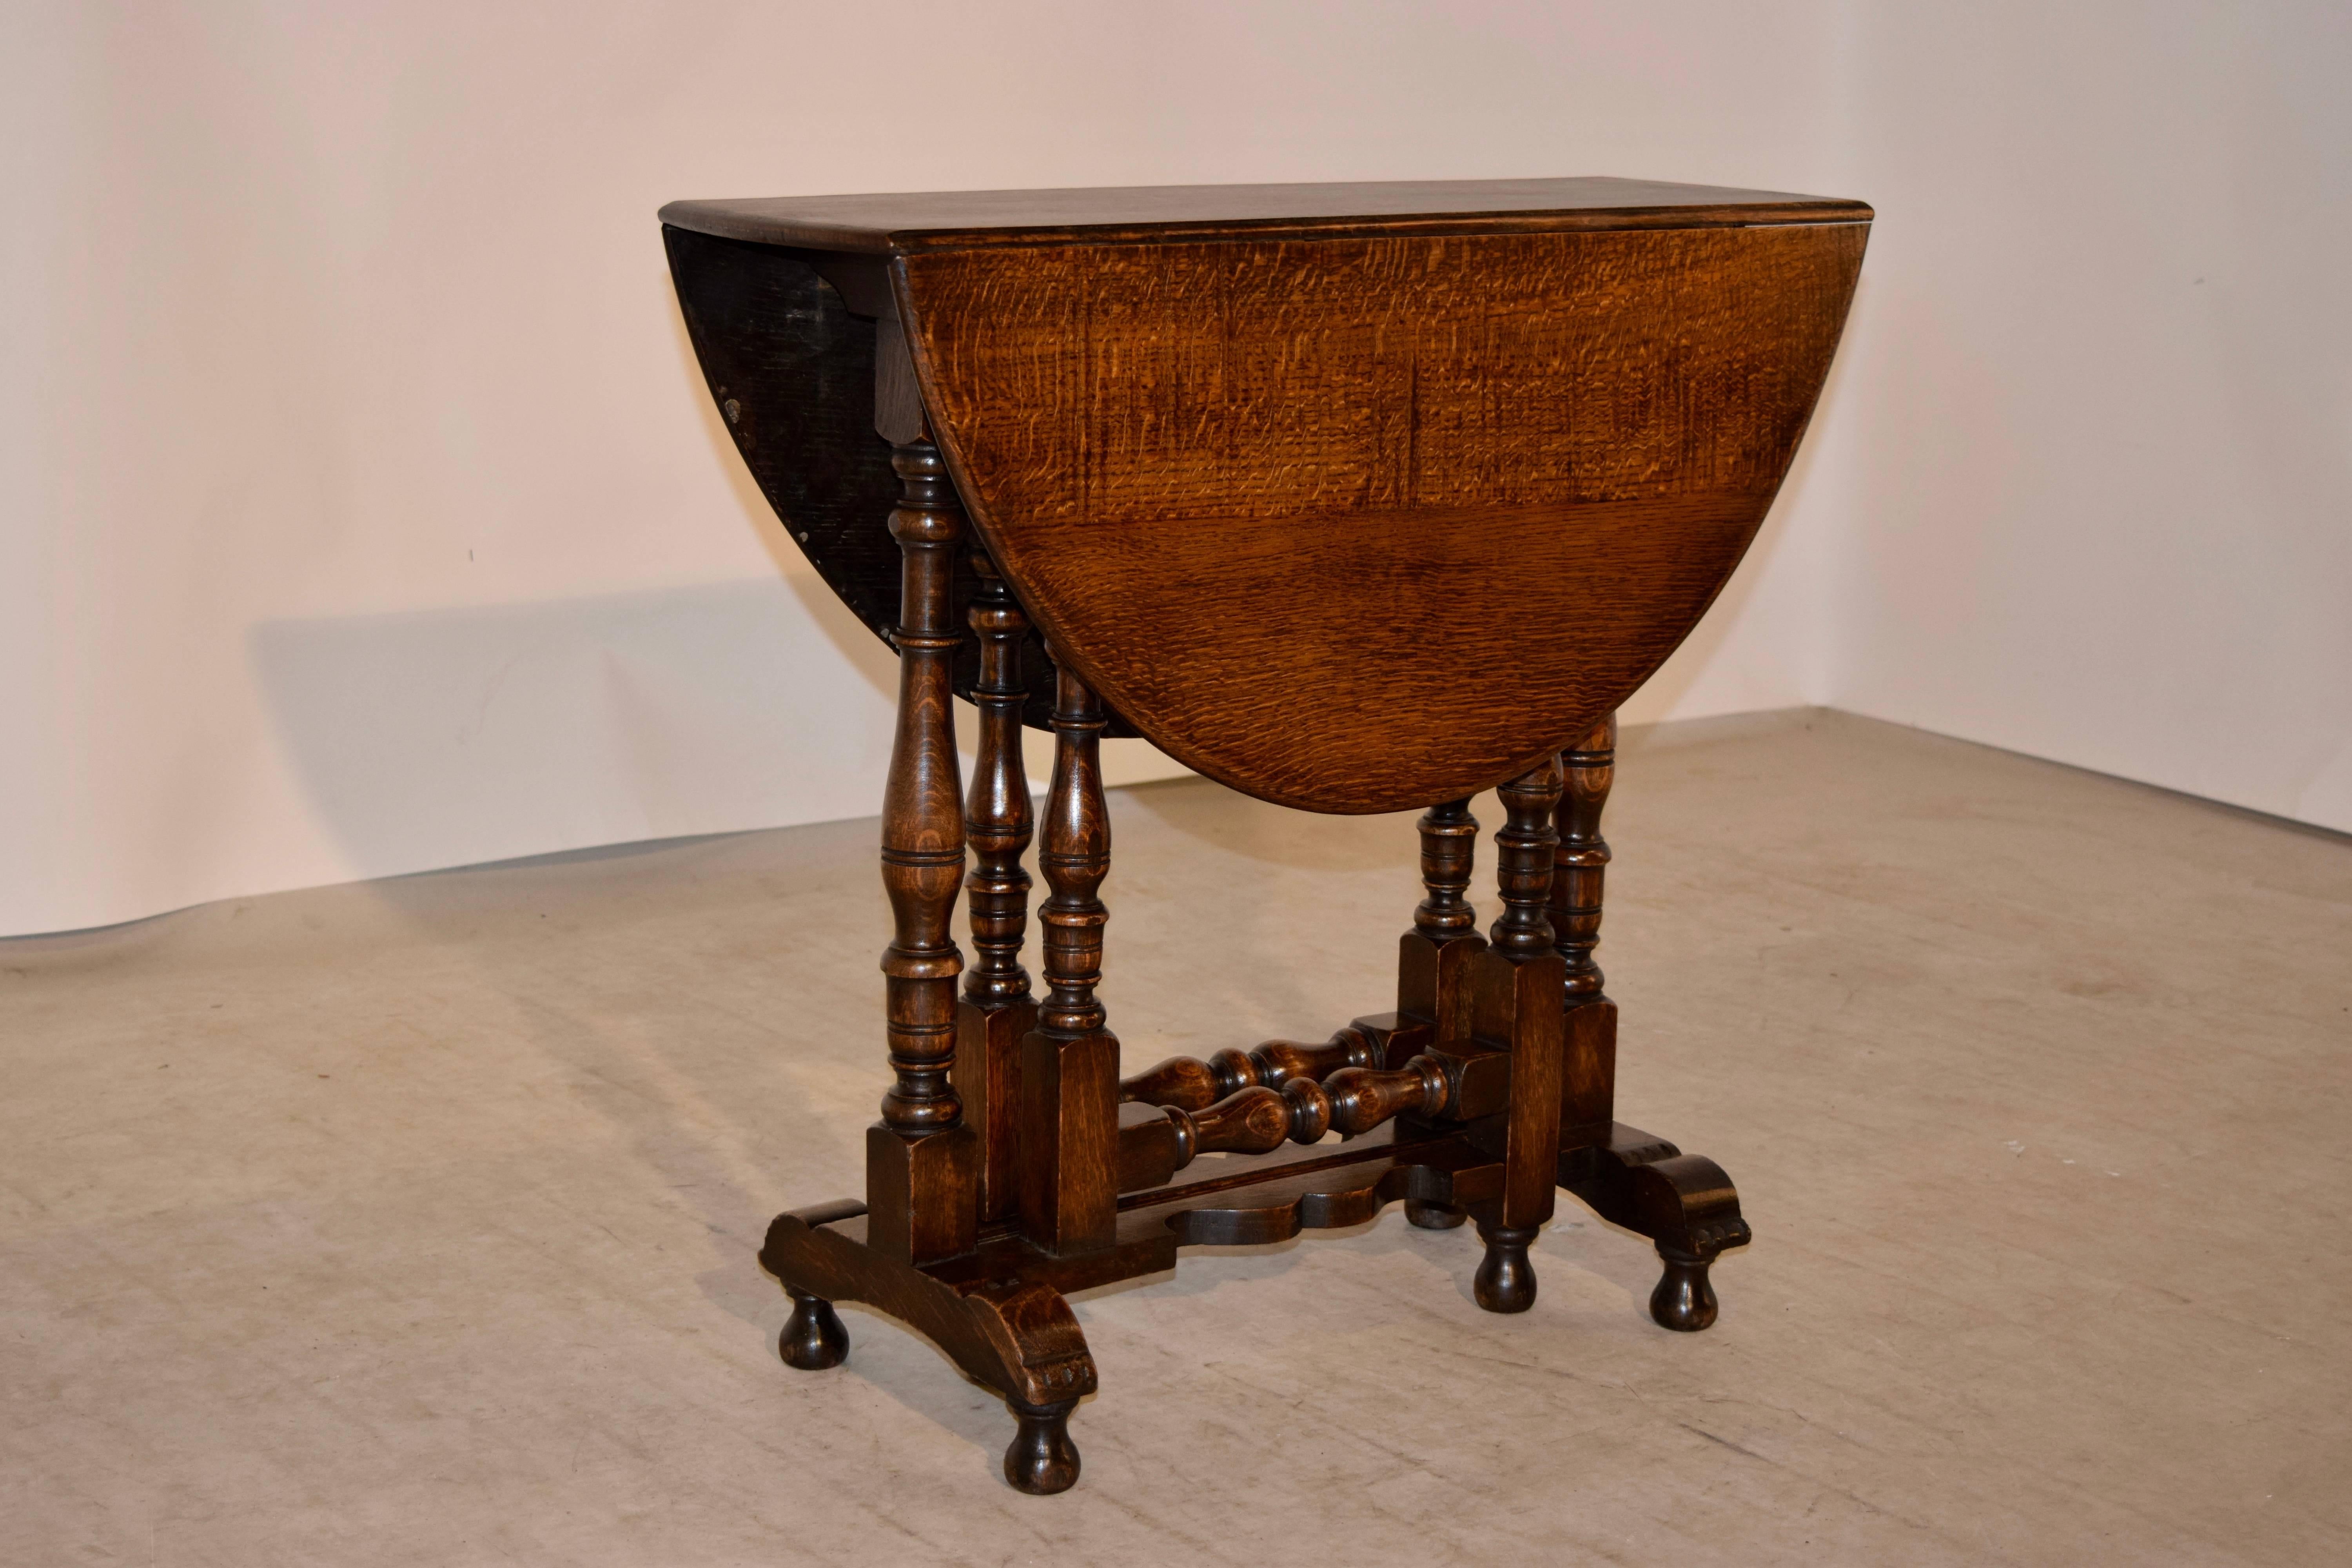 19th century English oak gate leg table with a rounded edge around the top following down to scalloped aprons and supported on hand turned legs and gates joined by a scalloped stretcher and trestles with hand turned feet. Top open measures 34.75 x